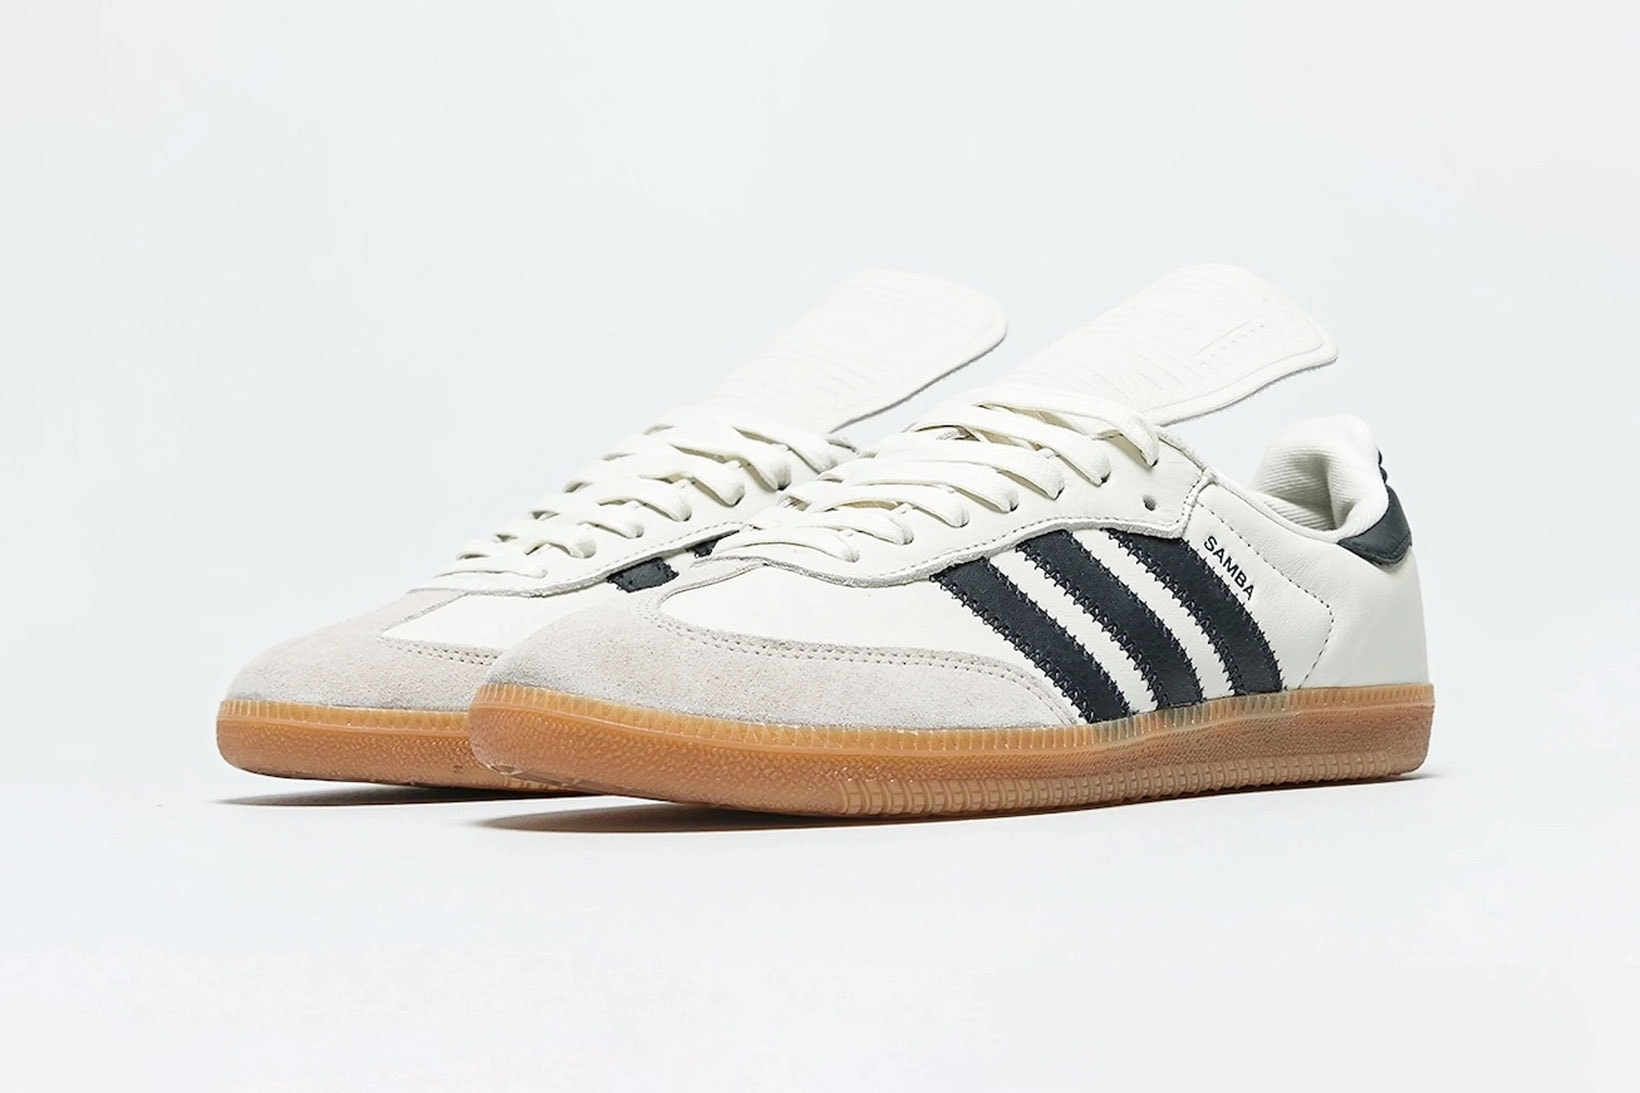 Pharrell Williams adidas Samba Humanrace Collaboration Sneakers Official Images Release Price